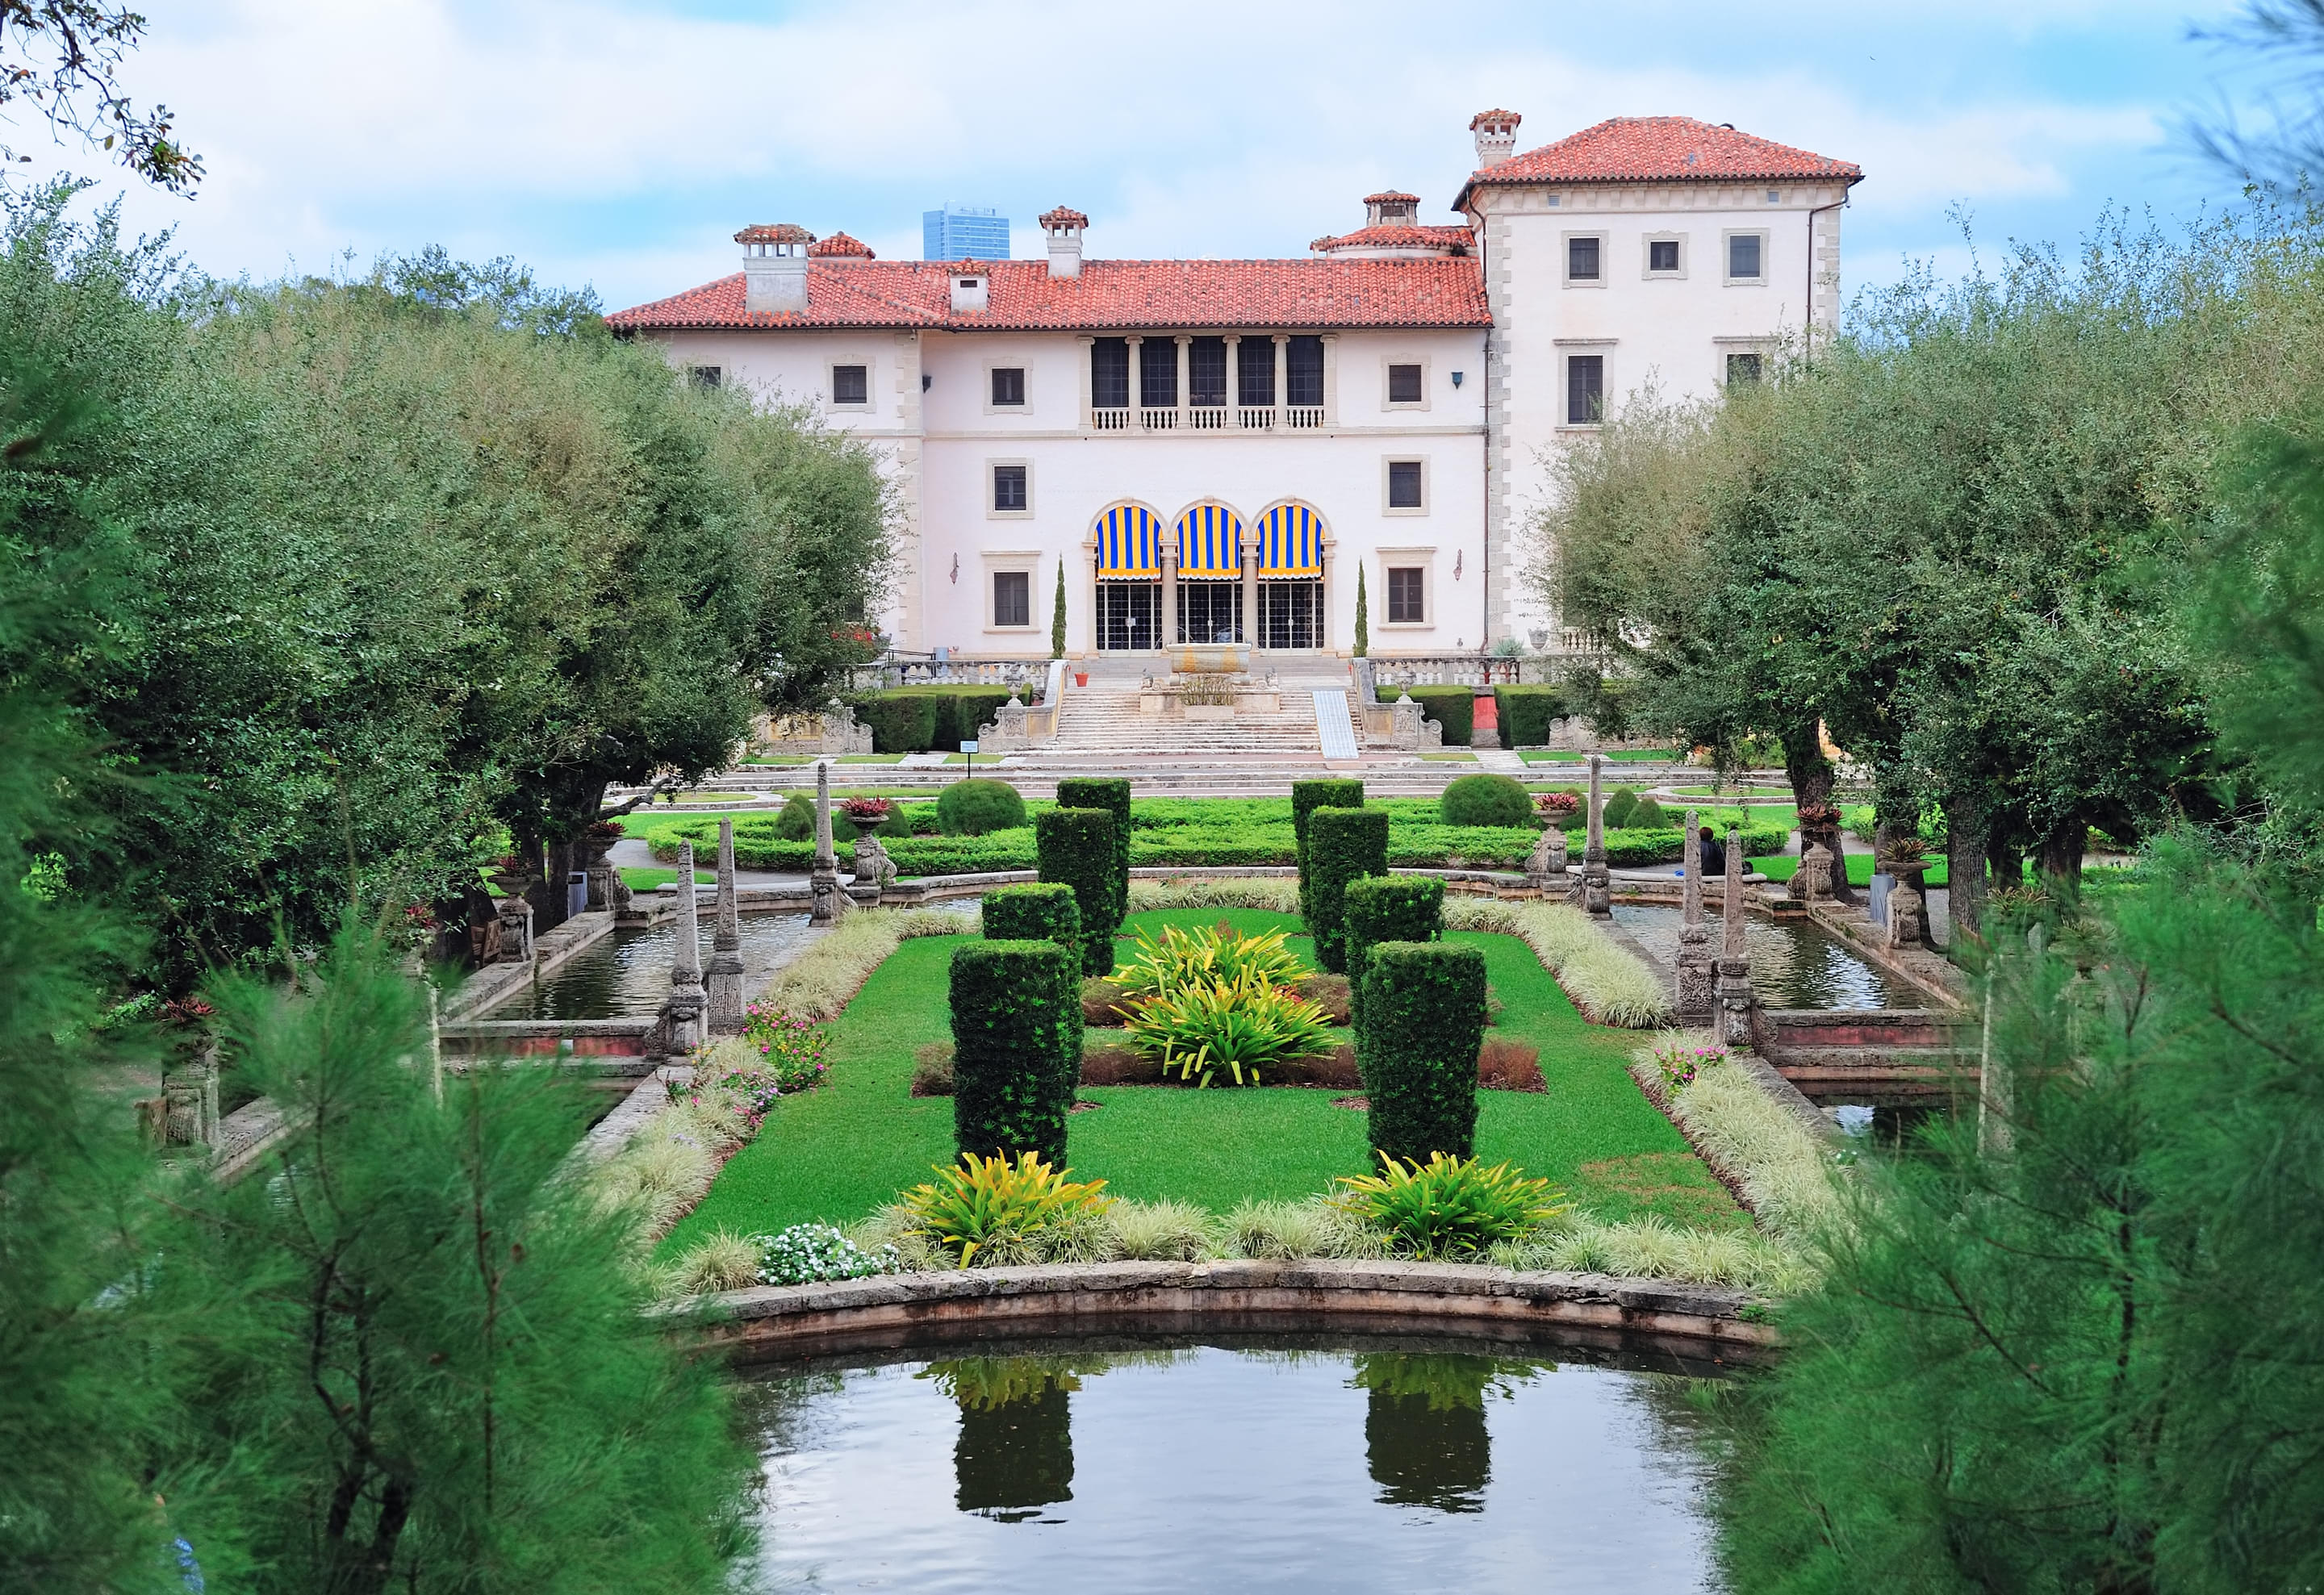 Vizcaya Museum And Gardens Overview